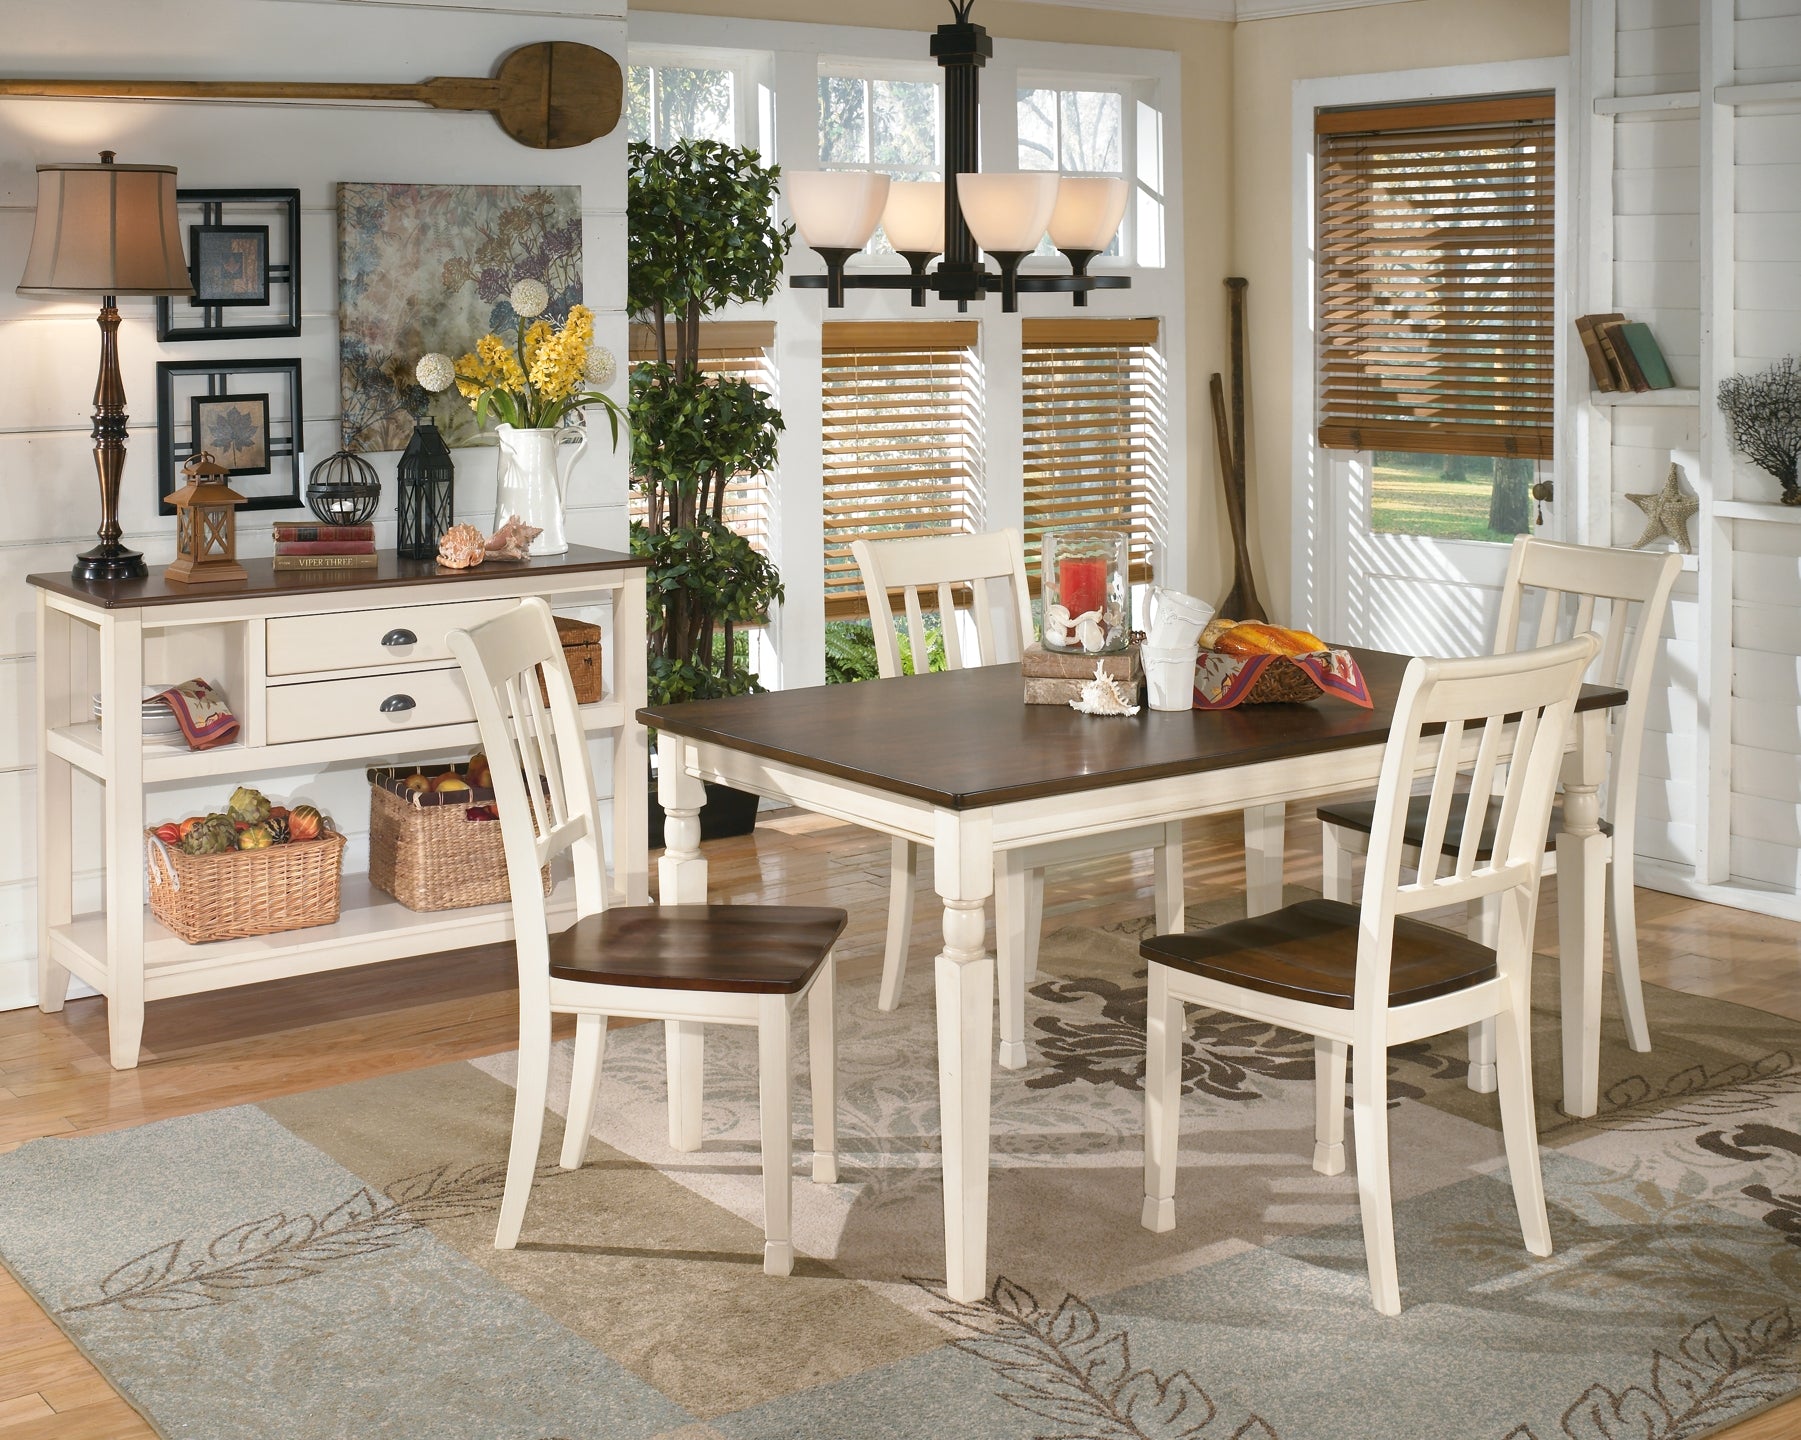 Whitesburg Dining Table and 4 Chairs with Storage Wilson Furniture (OH)  in Bridgeport, Ohio. Serving Moundsville, Richmond, Smithfield, Cadiz, & St. Clairesville